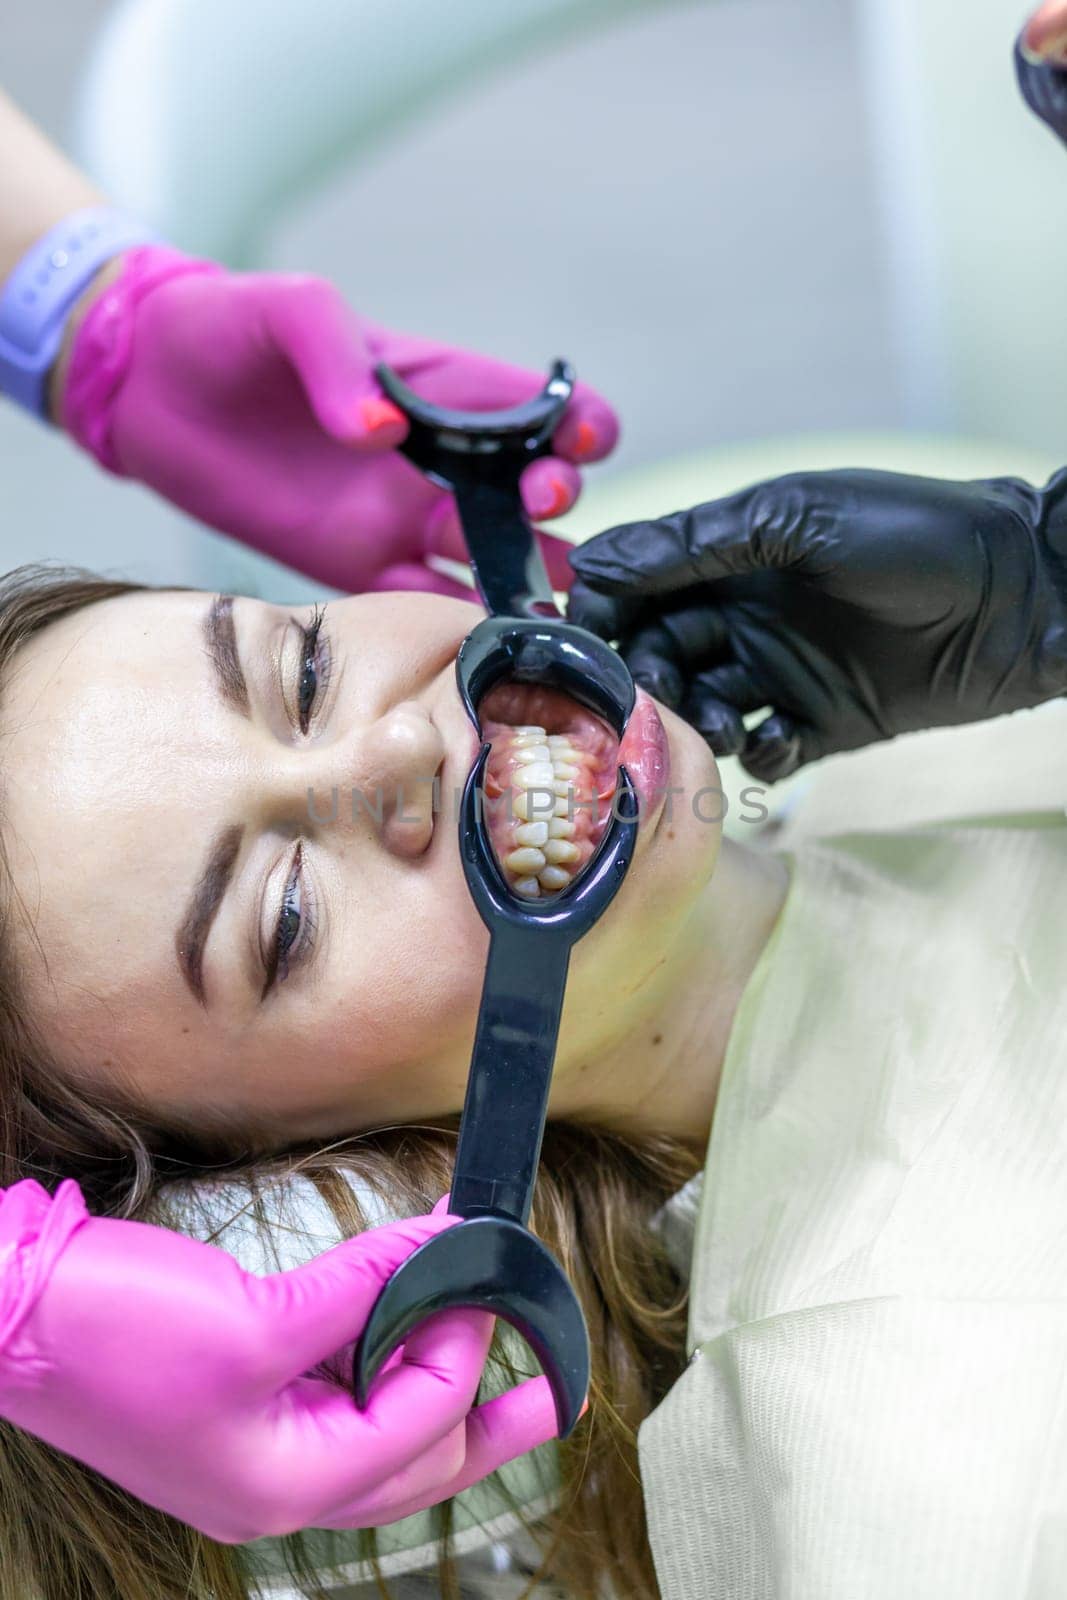 The process of removing braces. Beautiful woman with a mouth expander in a dental chair during the procedure of removing braces from her teeth. A dentist and an assistant work.